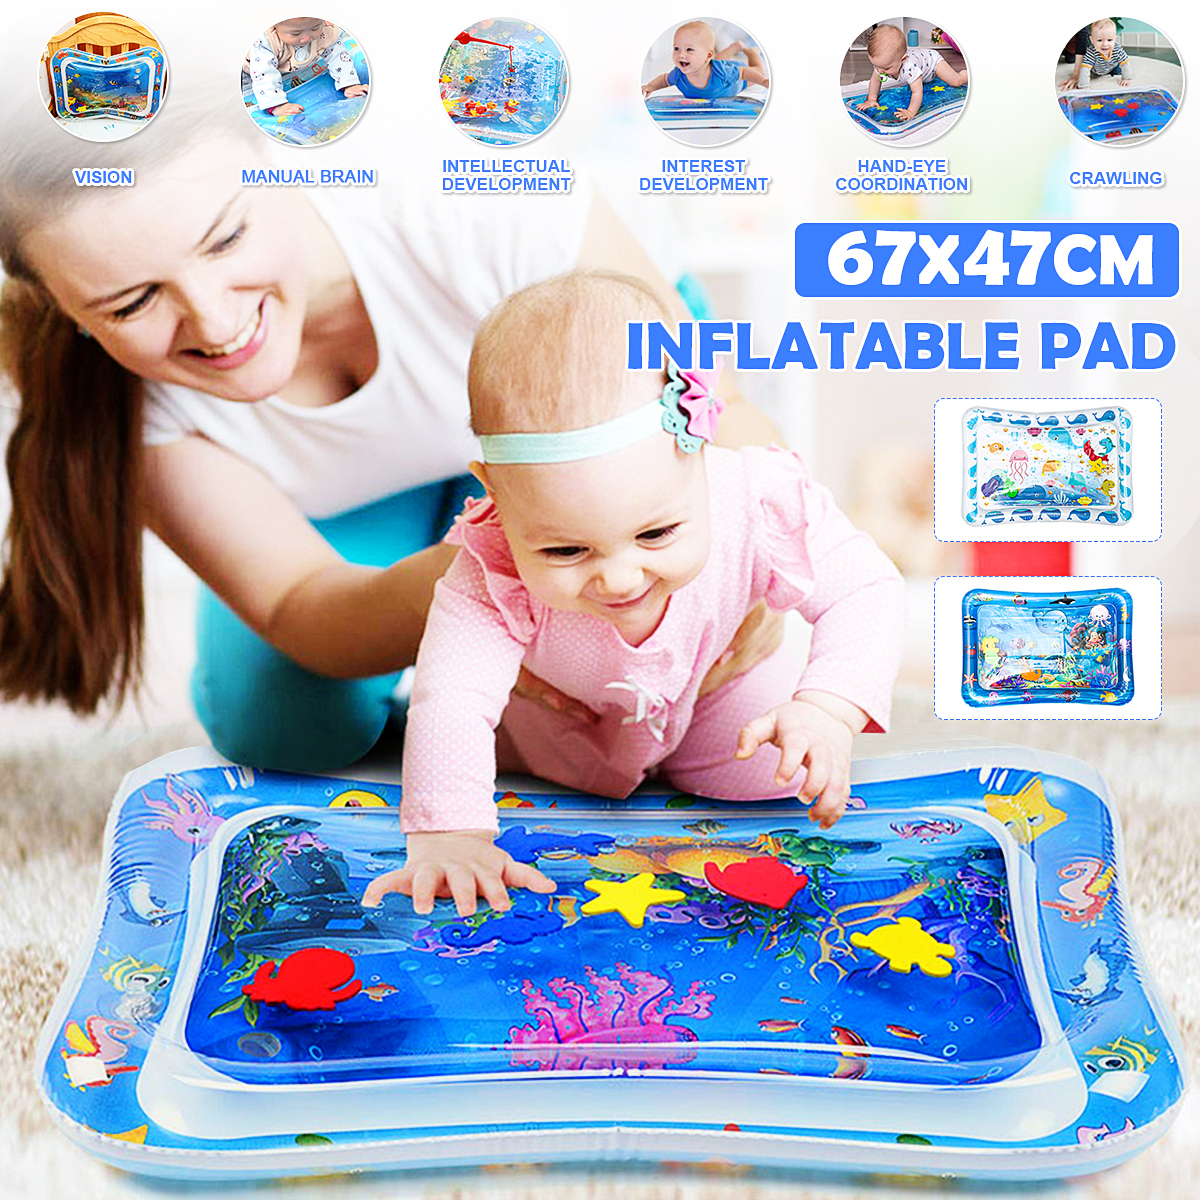 Inflatable-Baby-Water-Mat-Early-Education-Improve-Learning-Skill-Toys-for-Kids-Gift-1673925-1